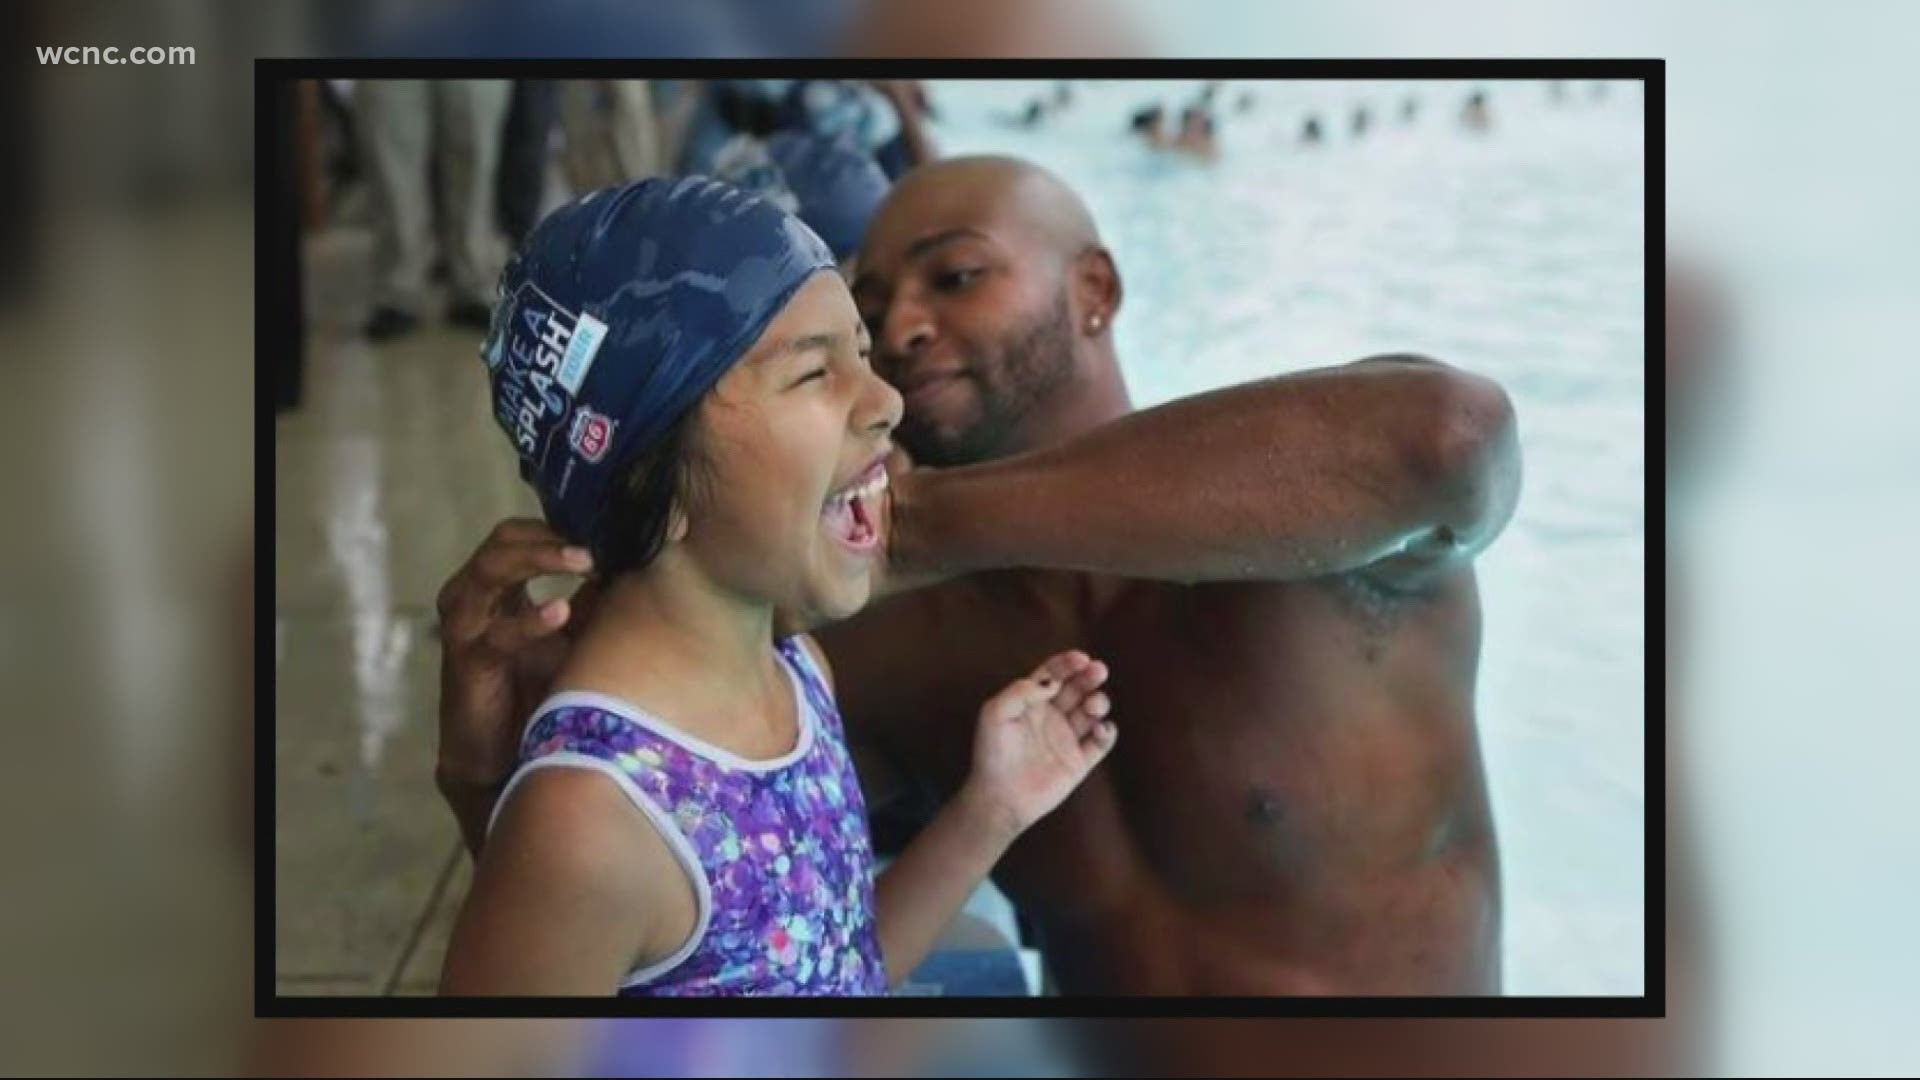 The four-time Olympic medalist in swimming said he wants to teach kids how to feel safe around water, saying his parents' goal to keep him safe gave him "purpose."